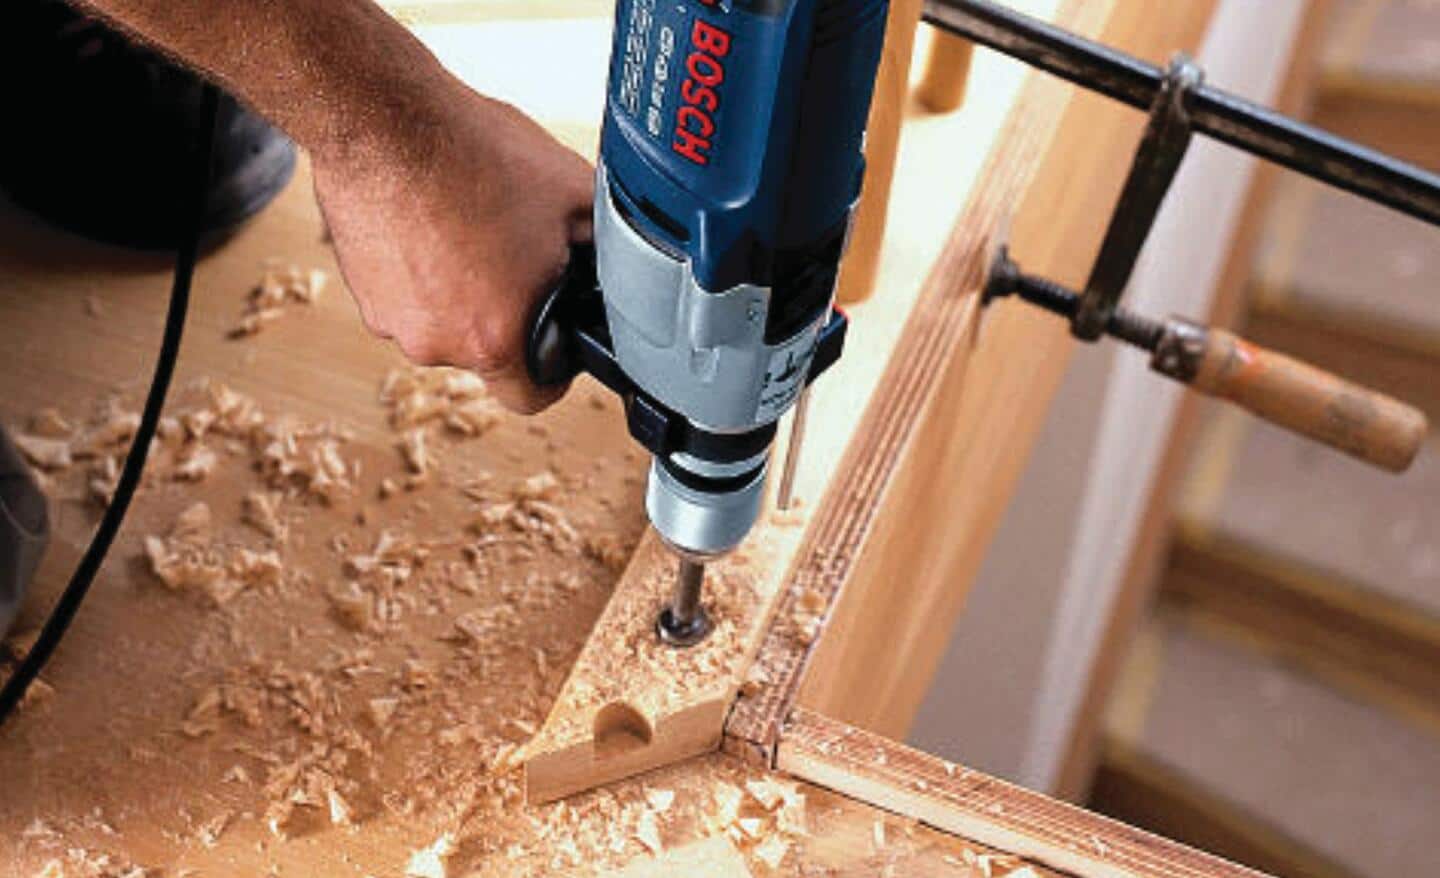 A person uses a Forstner drill bit to make a hole in a board.